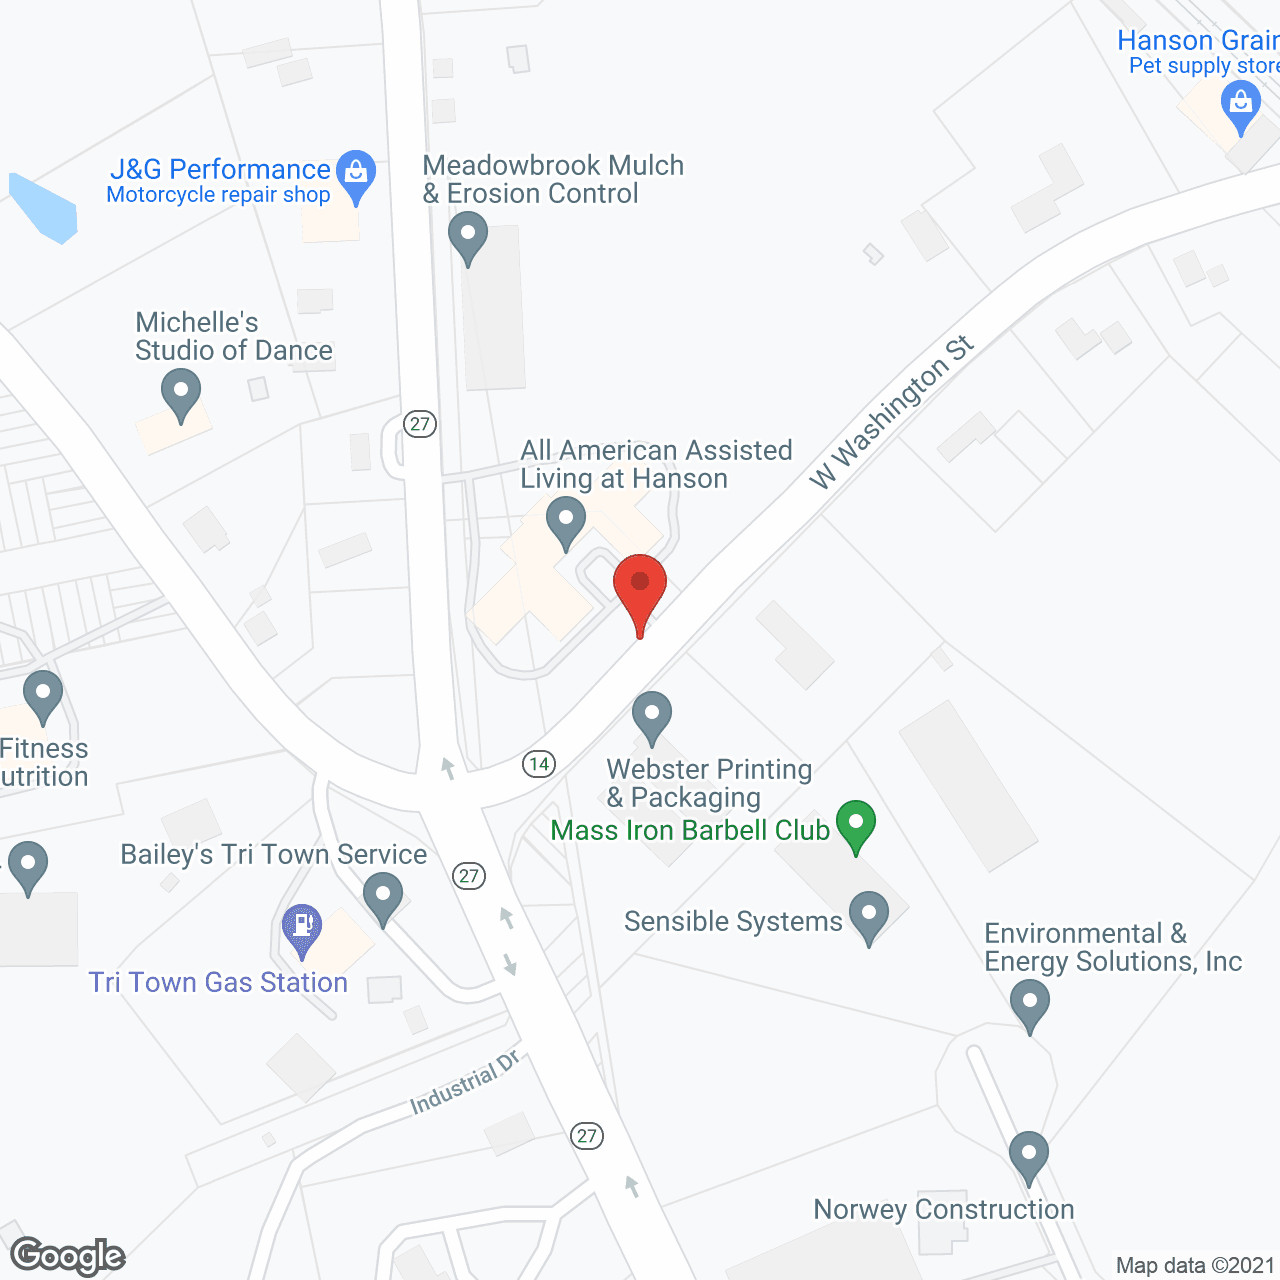 All American Assisted Living at Hanson in google map